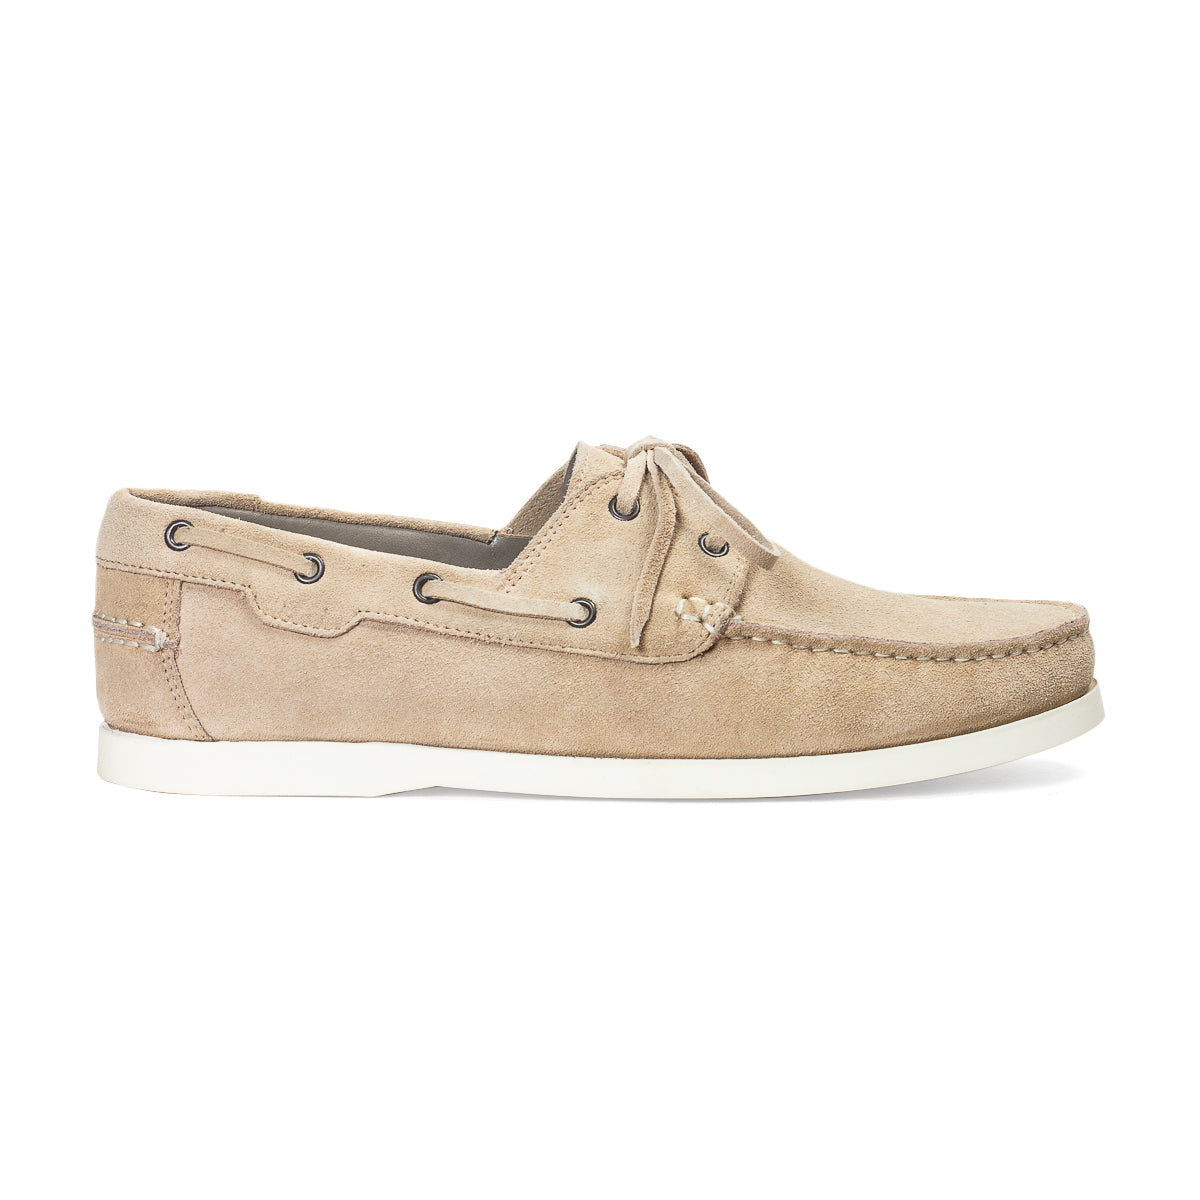 Lucia Boat Shoes (Beige - Limited Edition)